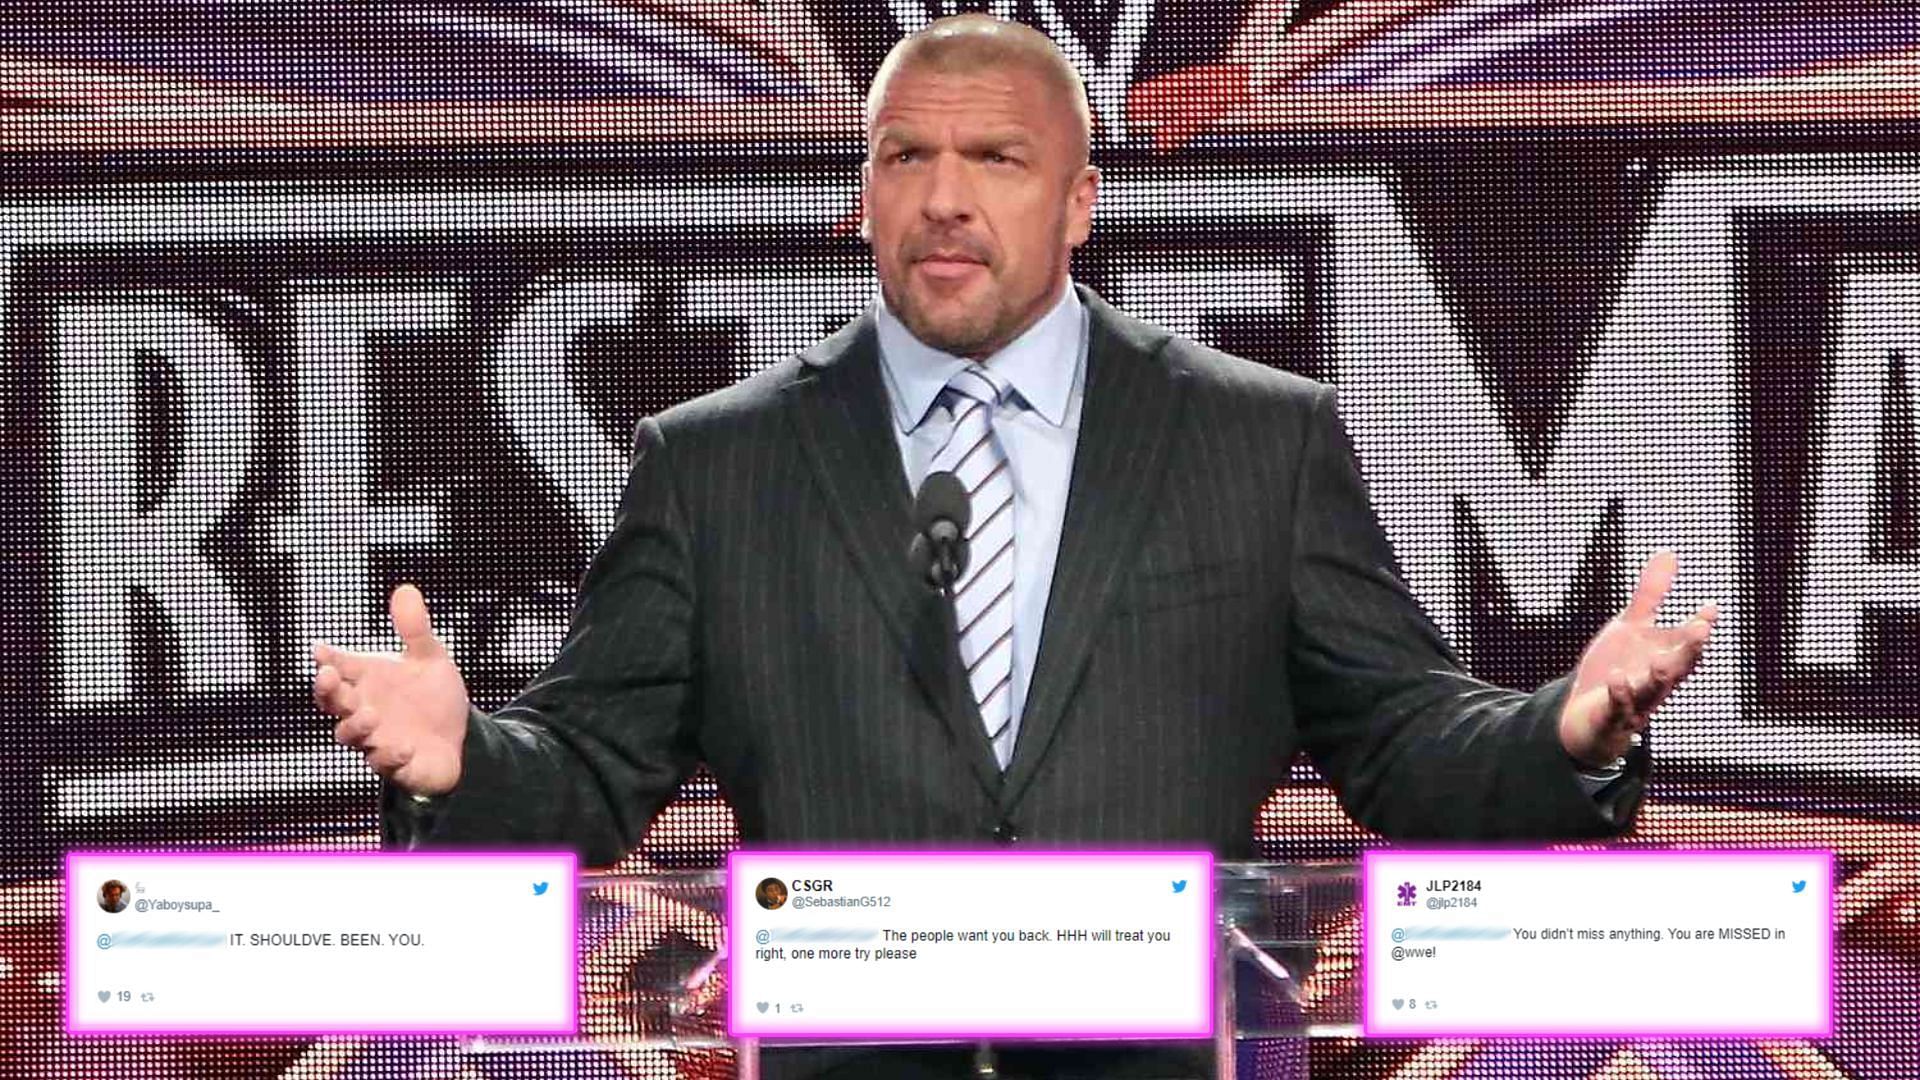 Many fans believe that Superstars will thrive under Triple H.